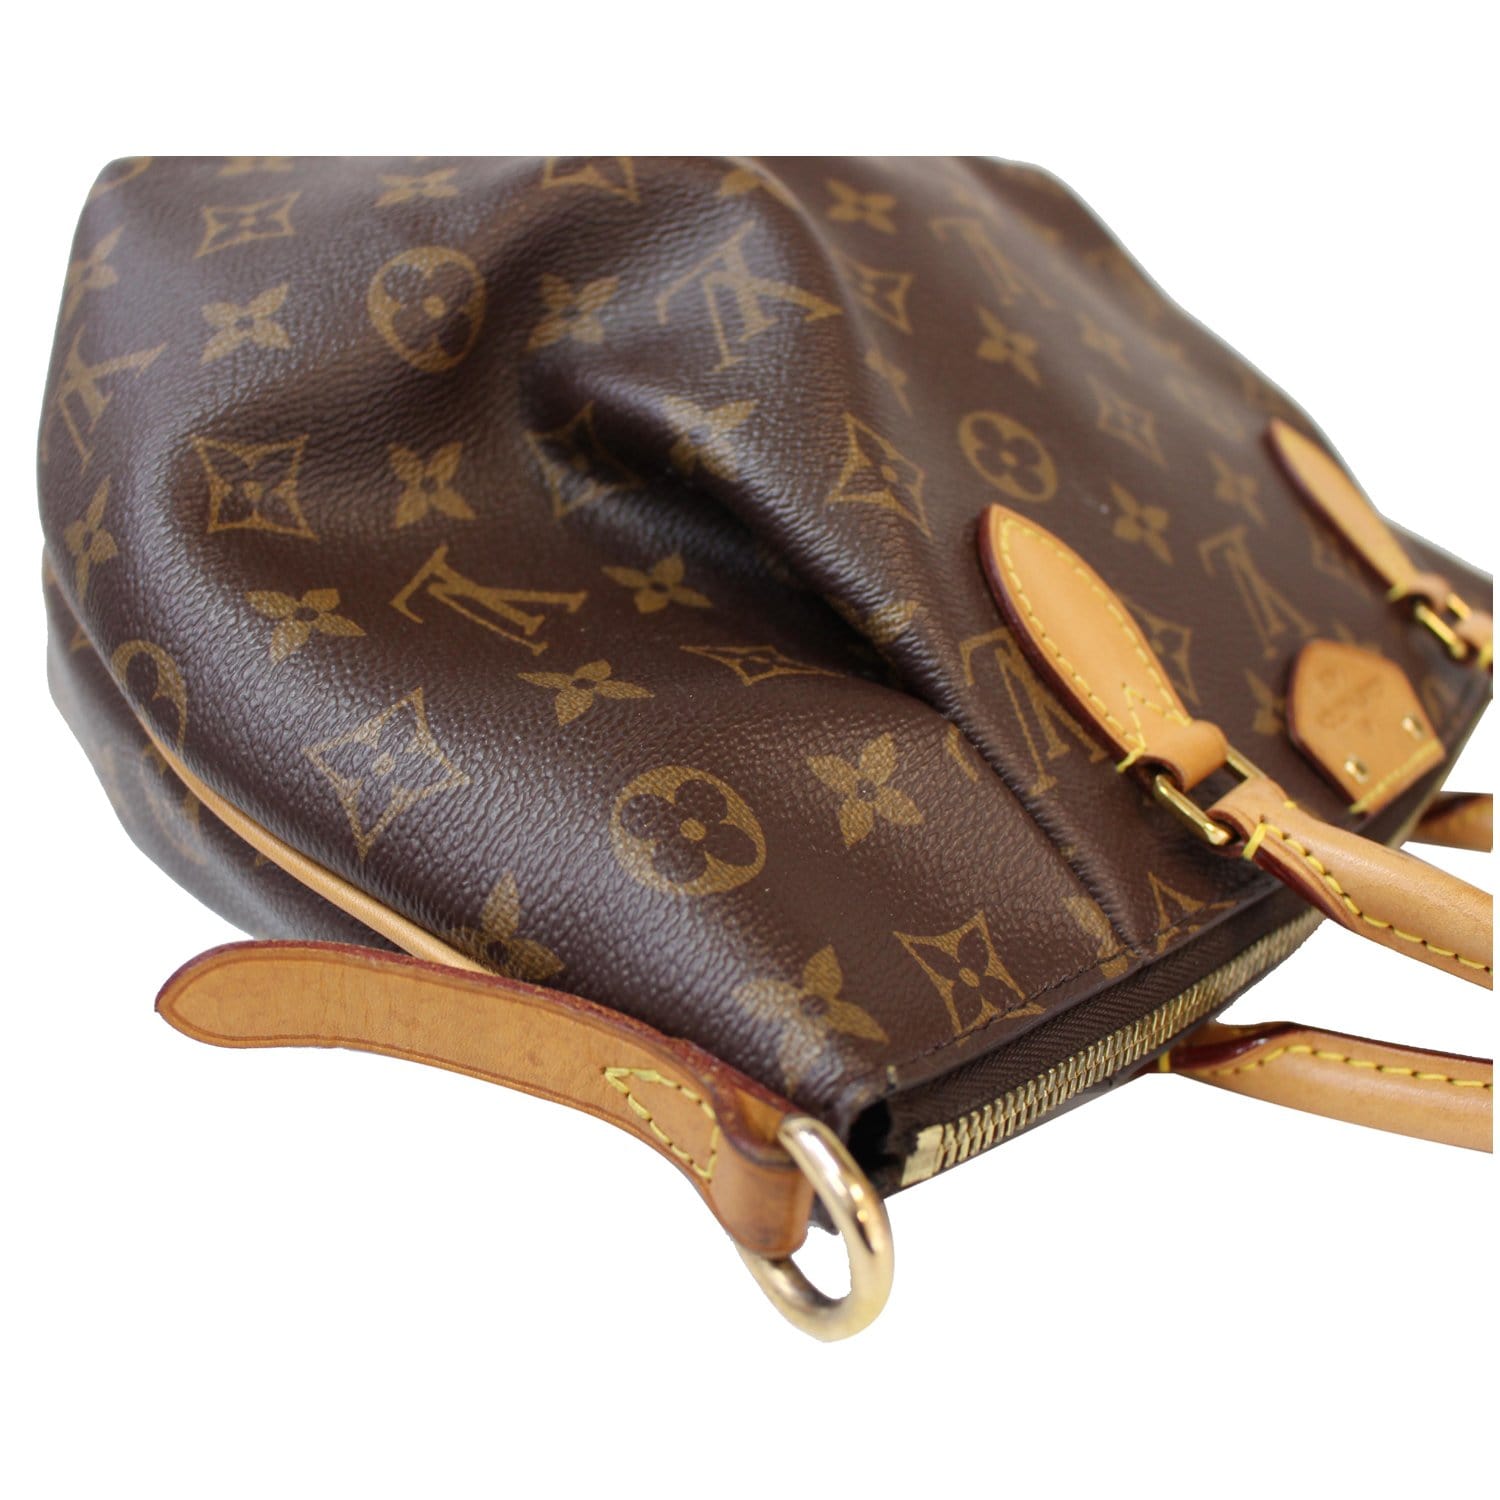 LOUIS VUITTON LOUIS VUITTON Turenne PM Shoulder Bag M59281 Epi leather  Brown Camel SHW used M59281｜Product Code：2101216150867｜BRAND OFF Online  Store